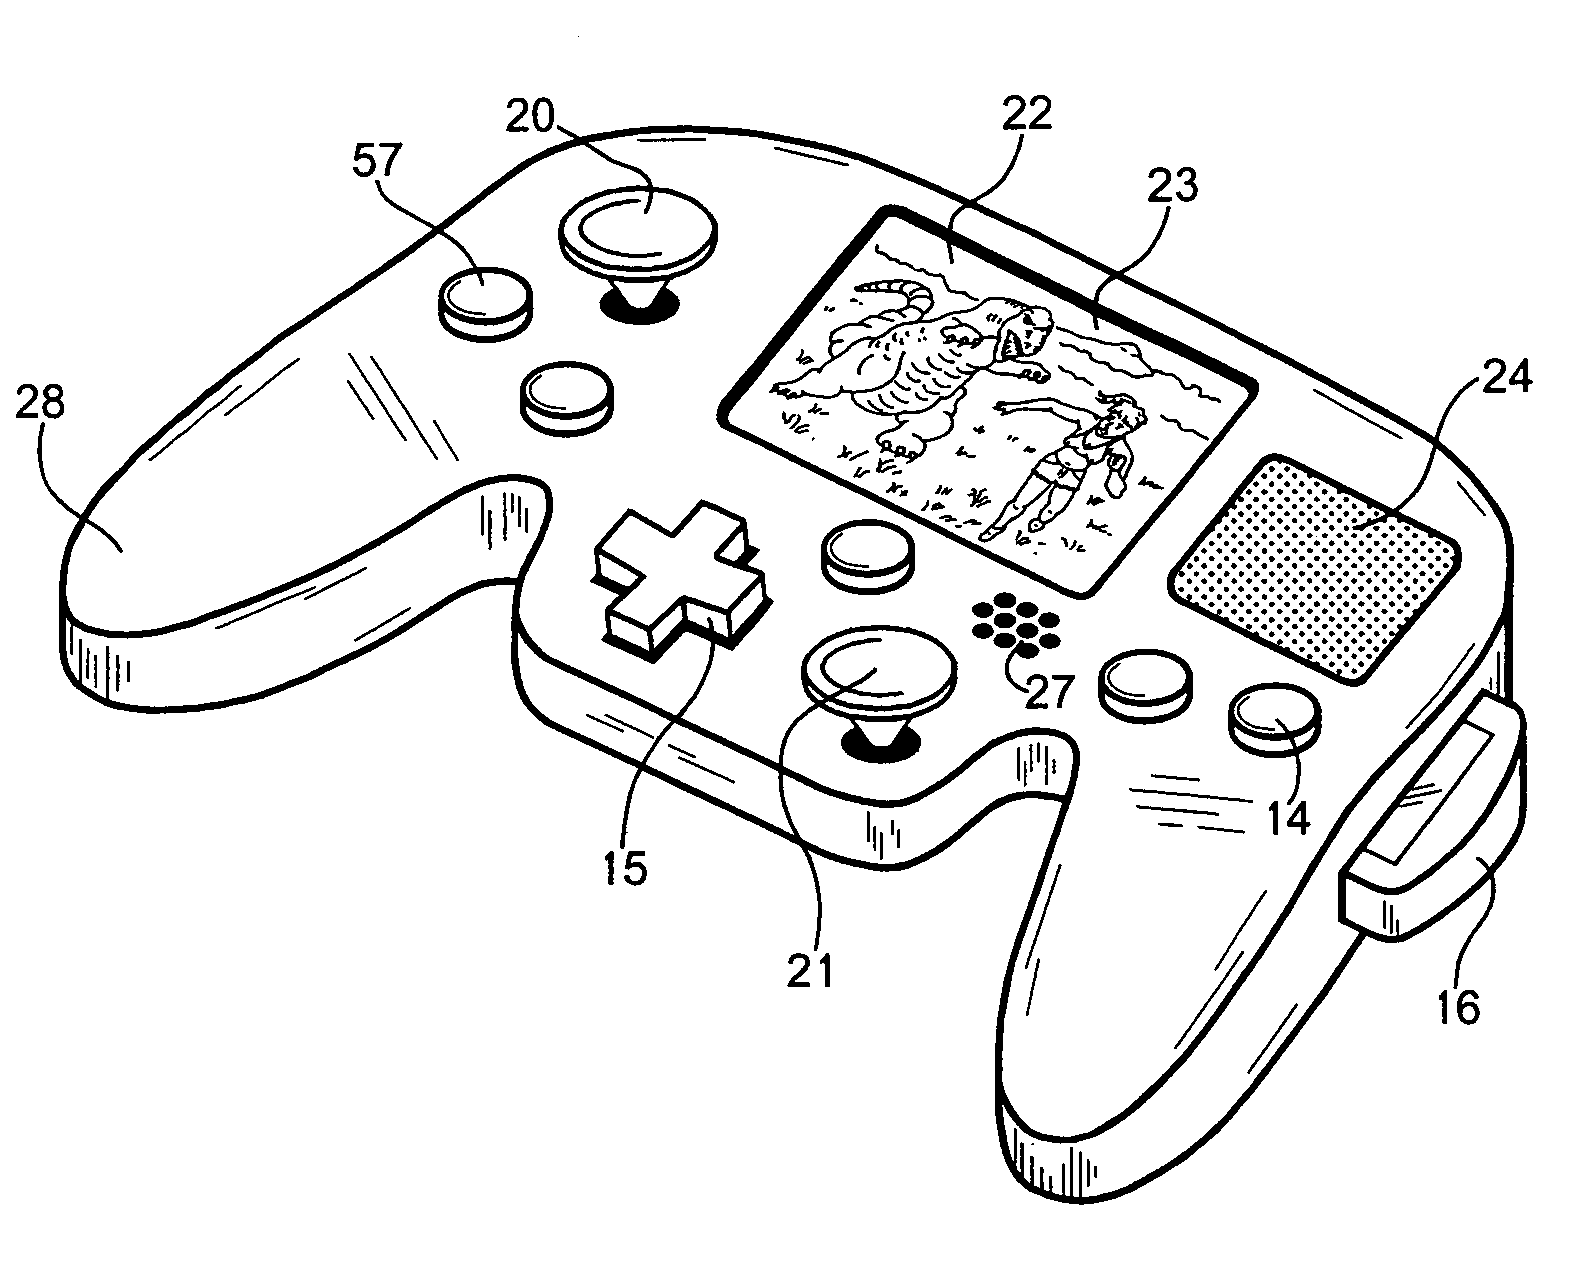 Linked portable and video game systems